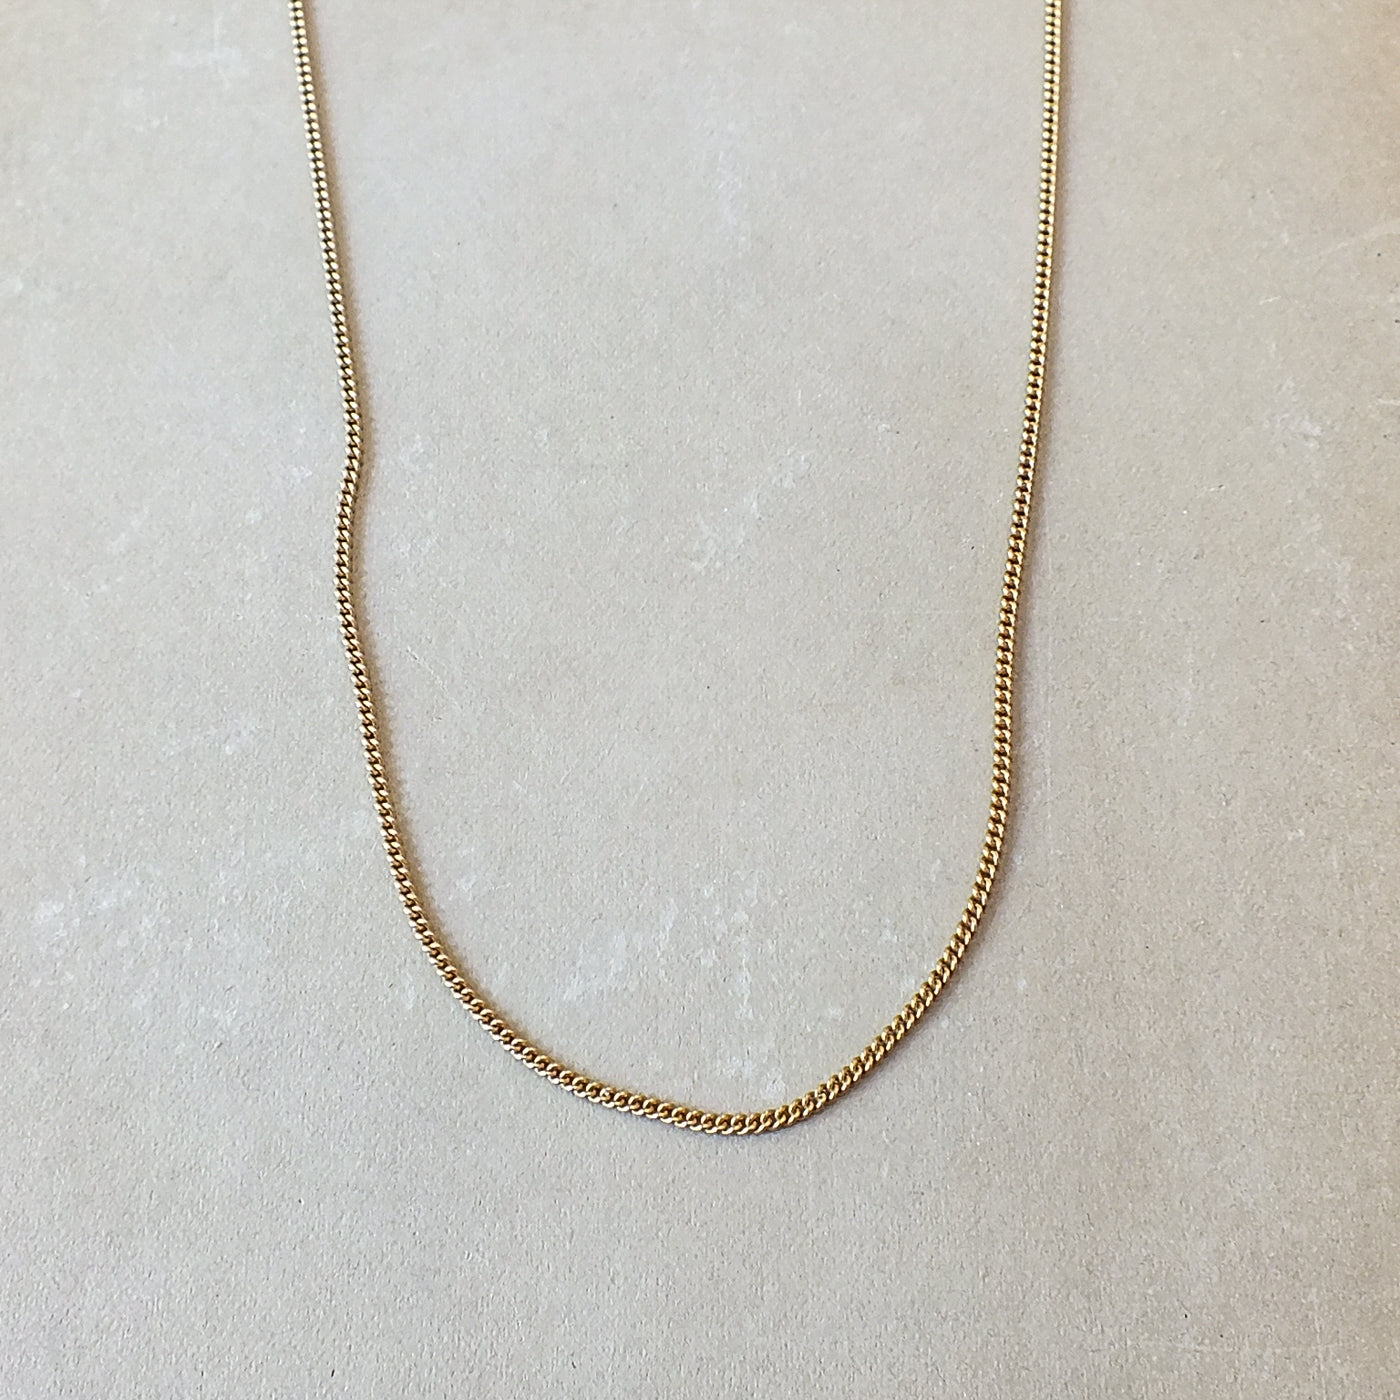 Becoming Jewelry Gold filled curb chain necklace on a pale background.